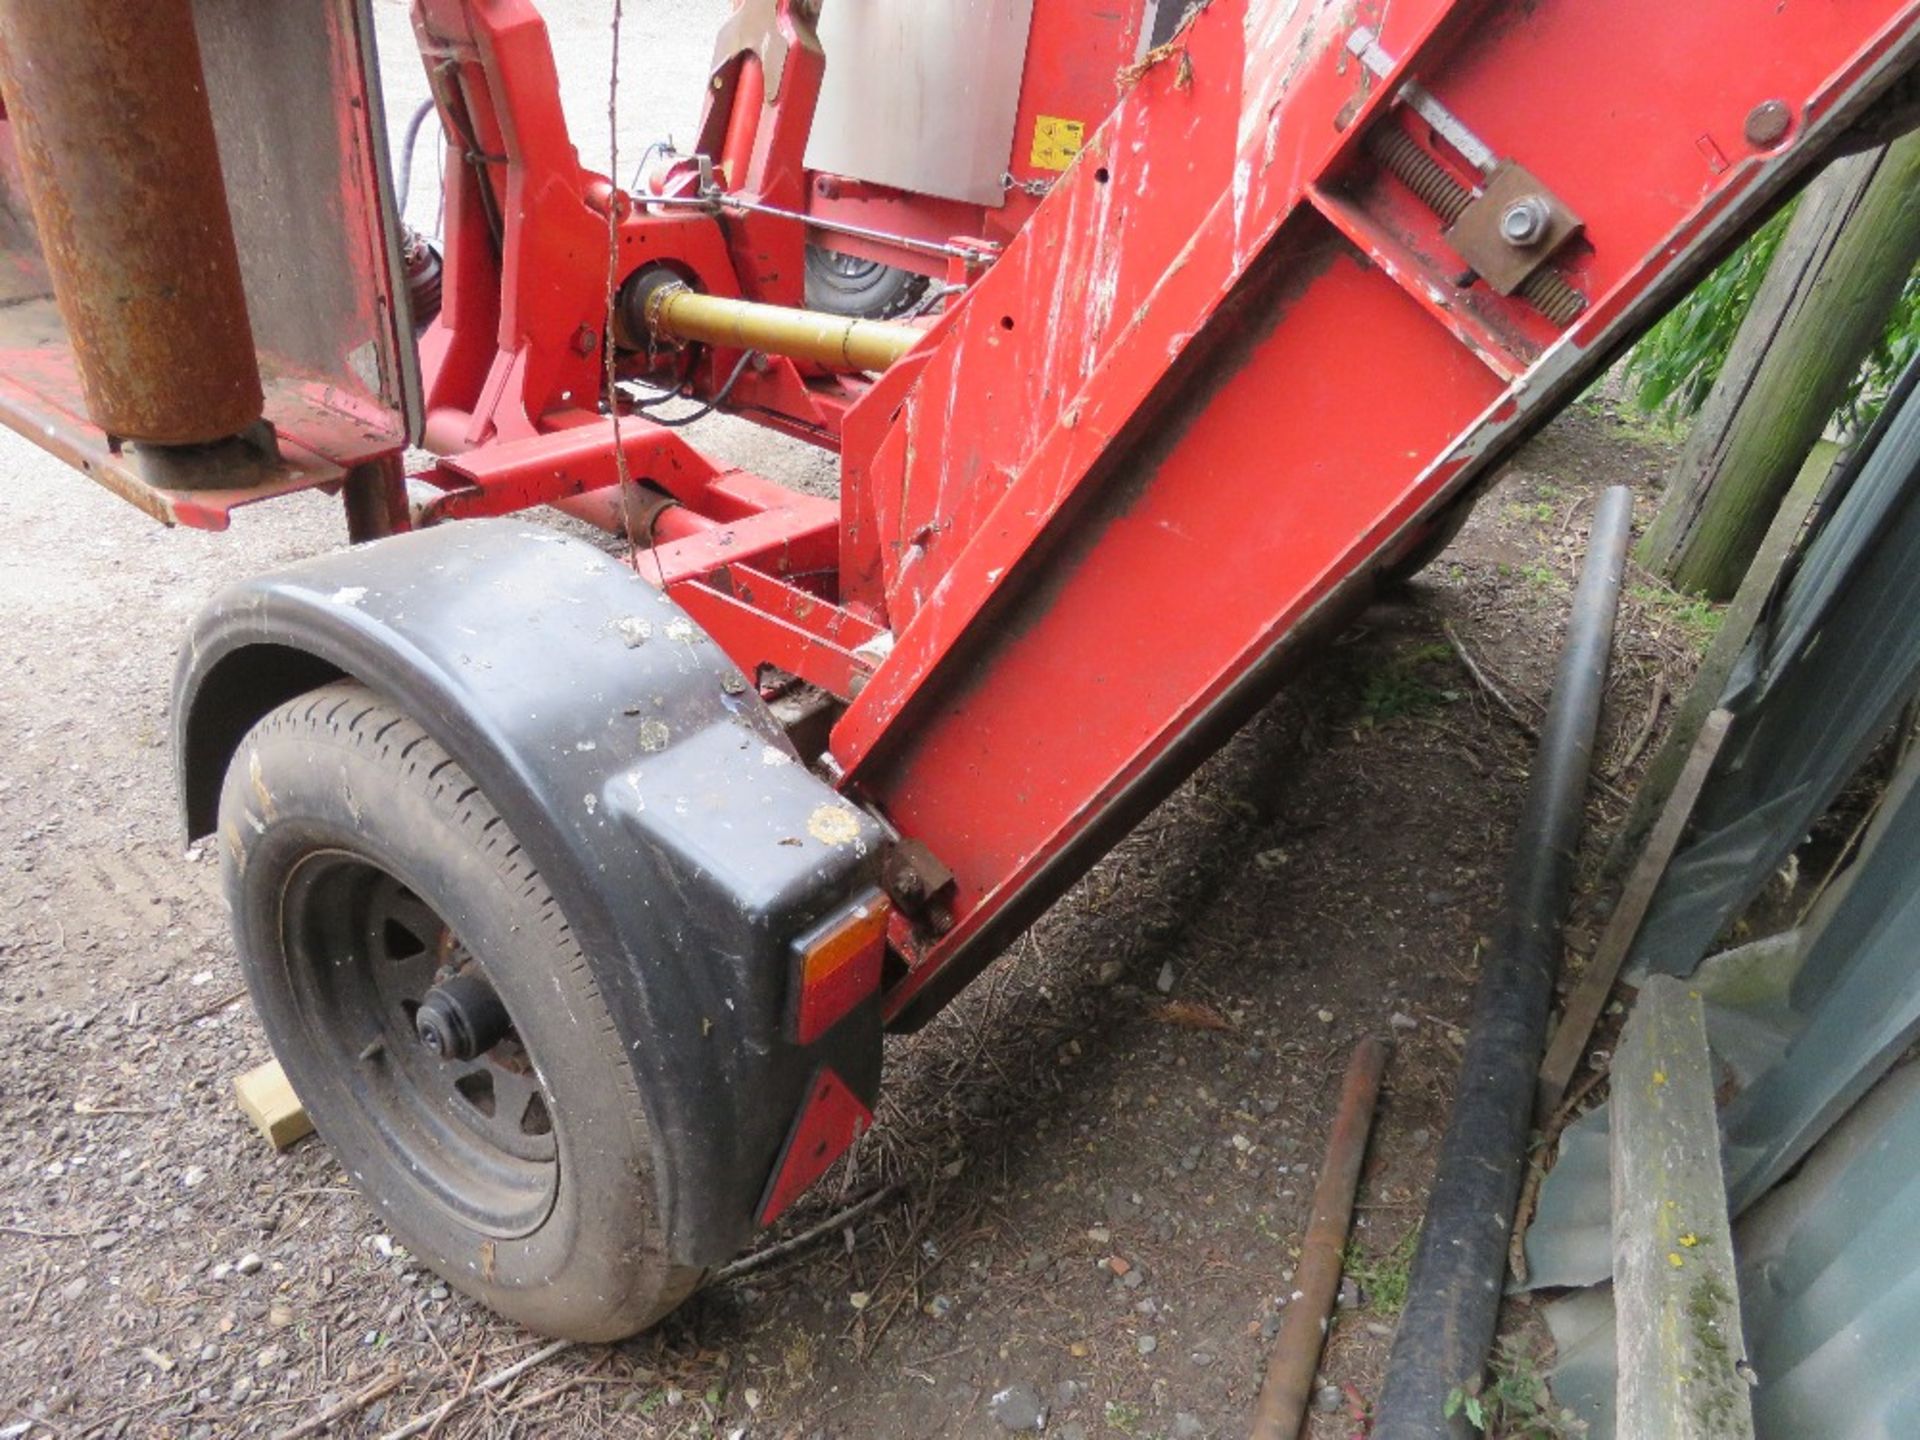 TRIMAX 728-610-400 BATWING TYPE ROLLER MOWER, YEAR 2017. PEGASUS S3 HEADS. NB: REQUIRES SOME REPAIR - Image 7 of 11